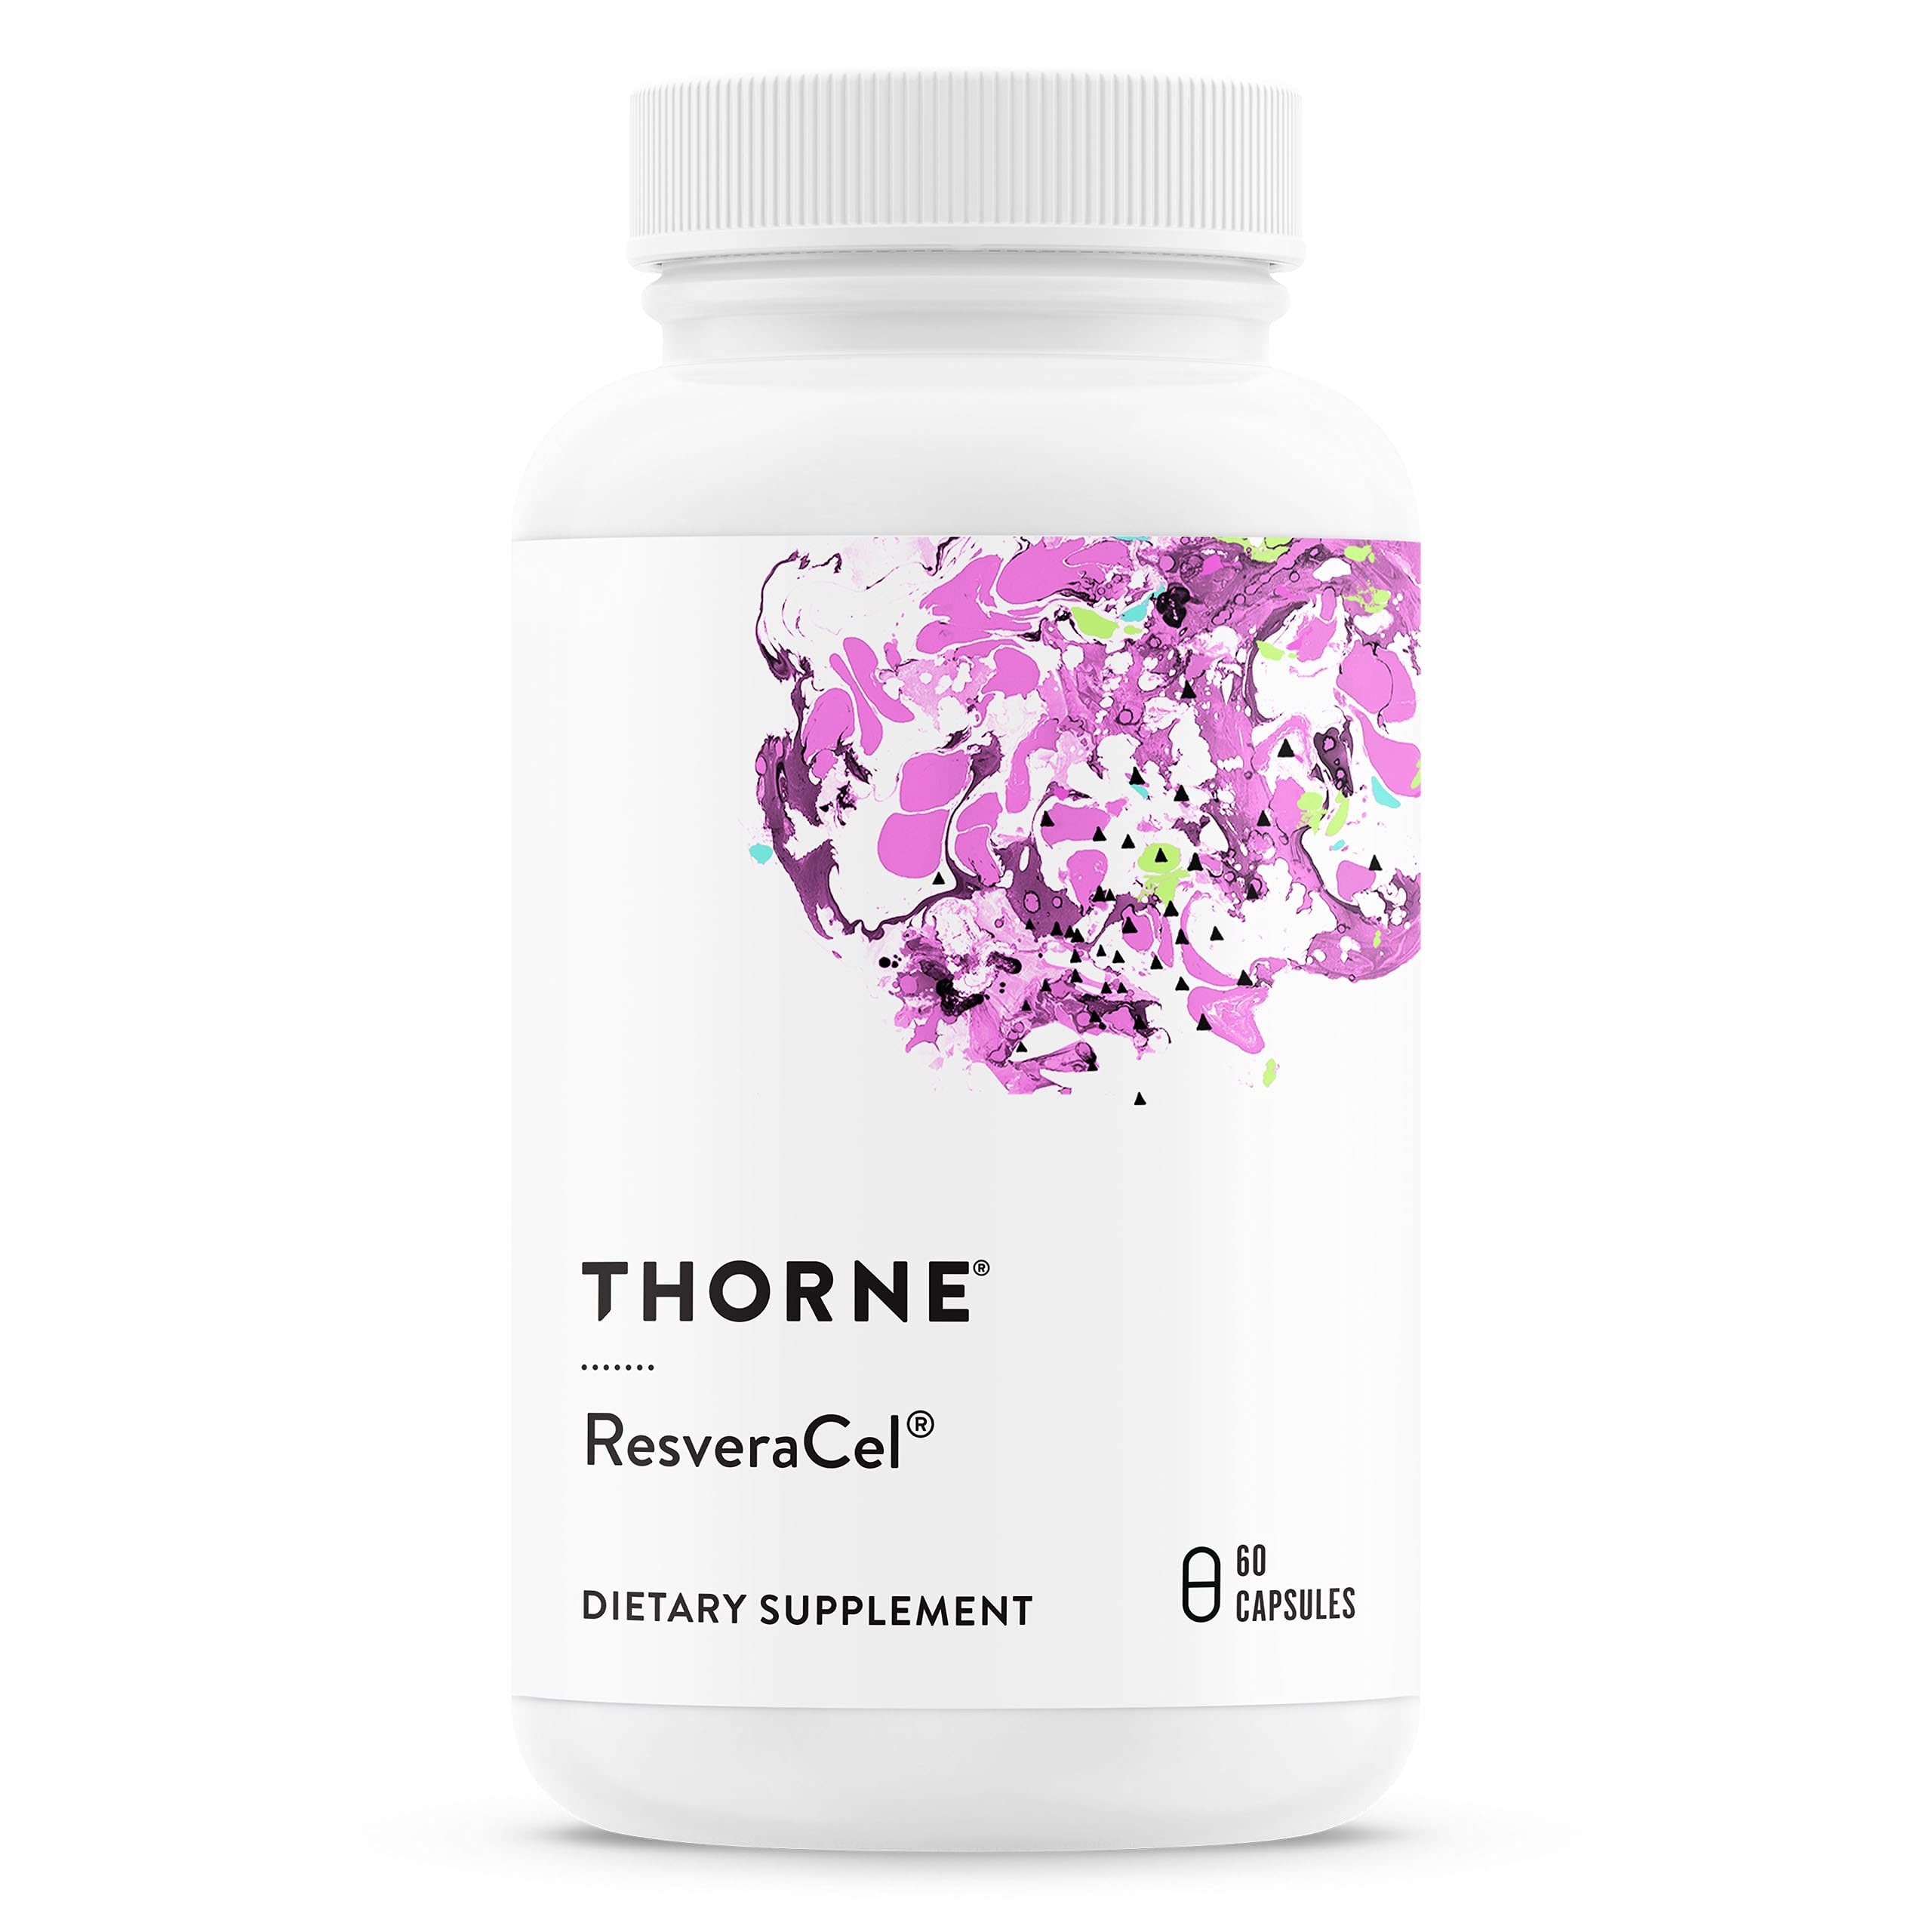 Thorne ResveraCel - Nicotinamide Riboside with Quercetin Phytosome and Resveratrol - Support Healthy Aging, Methylation, Cellular Energy Production and Metabolism - 60 Capsules - 30 Servings